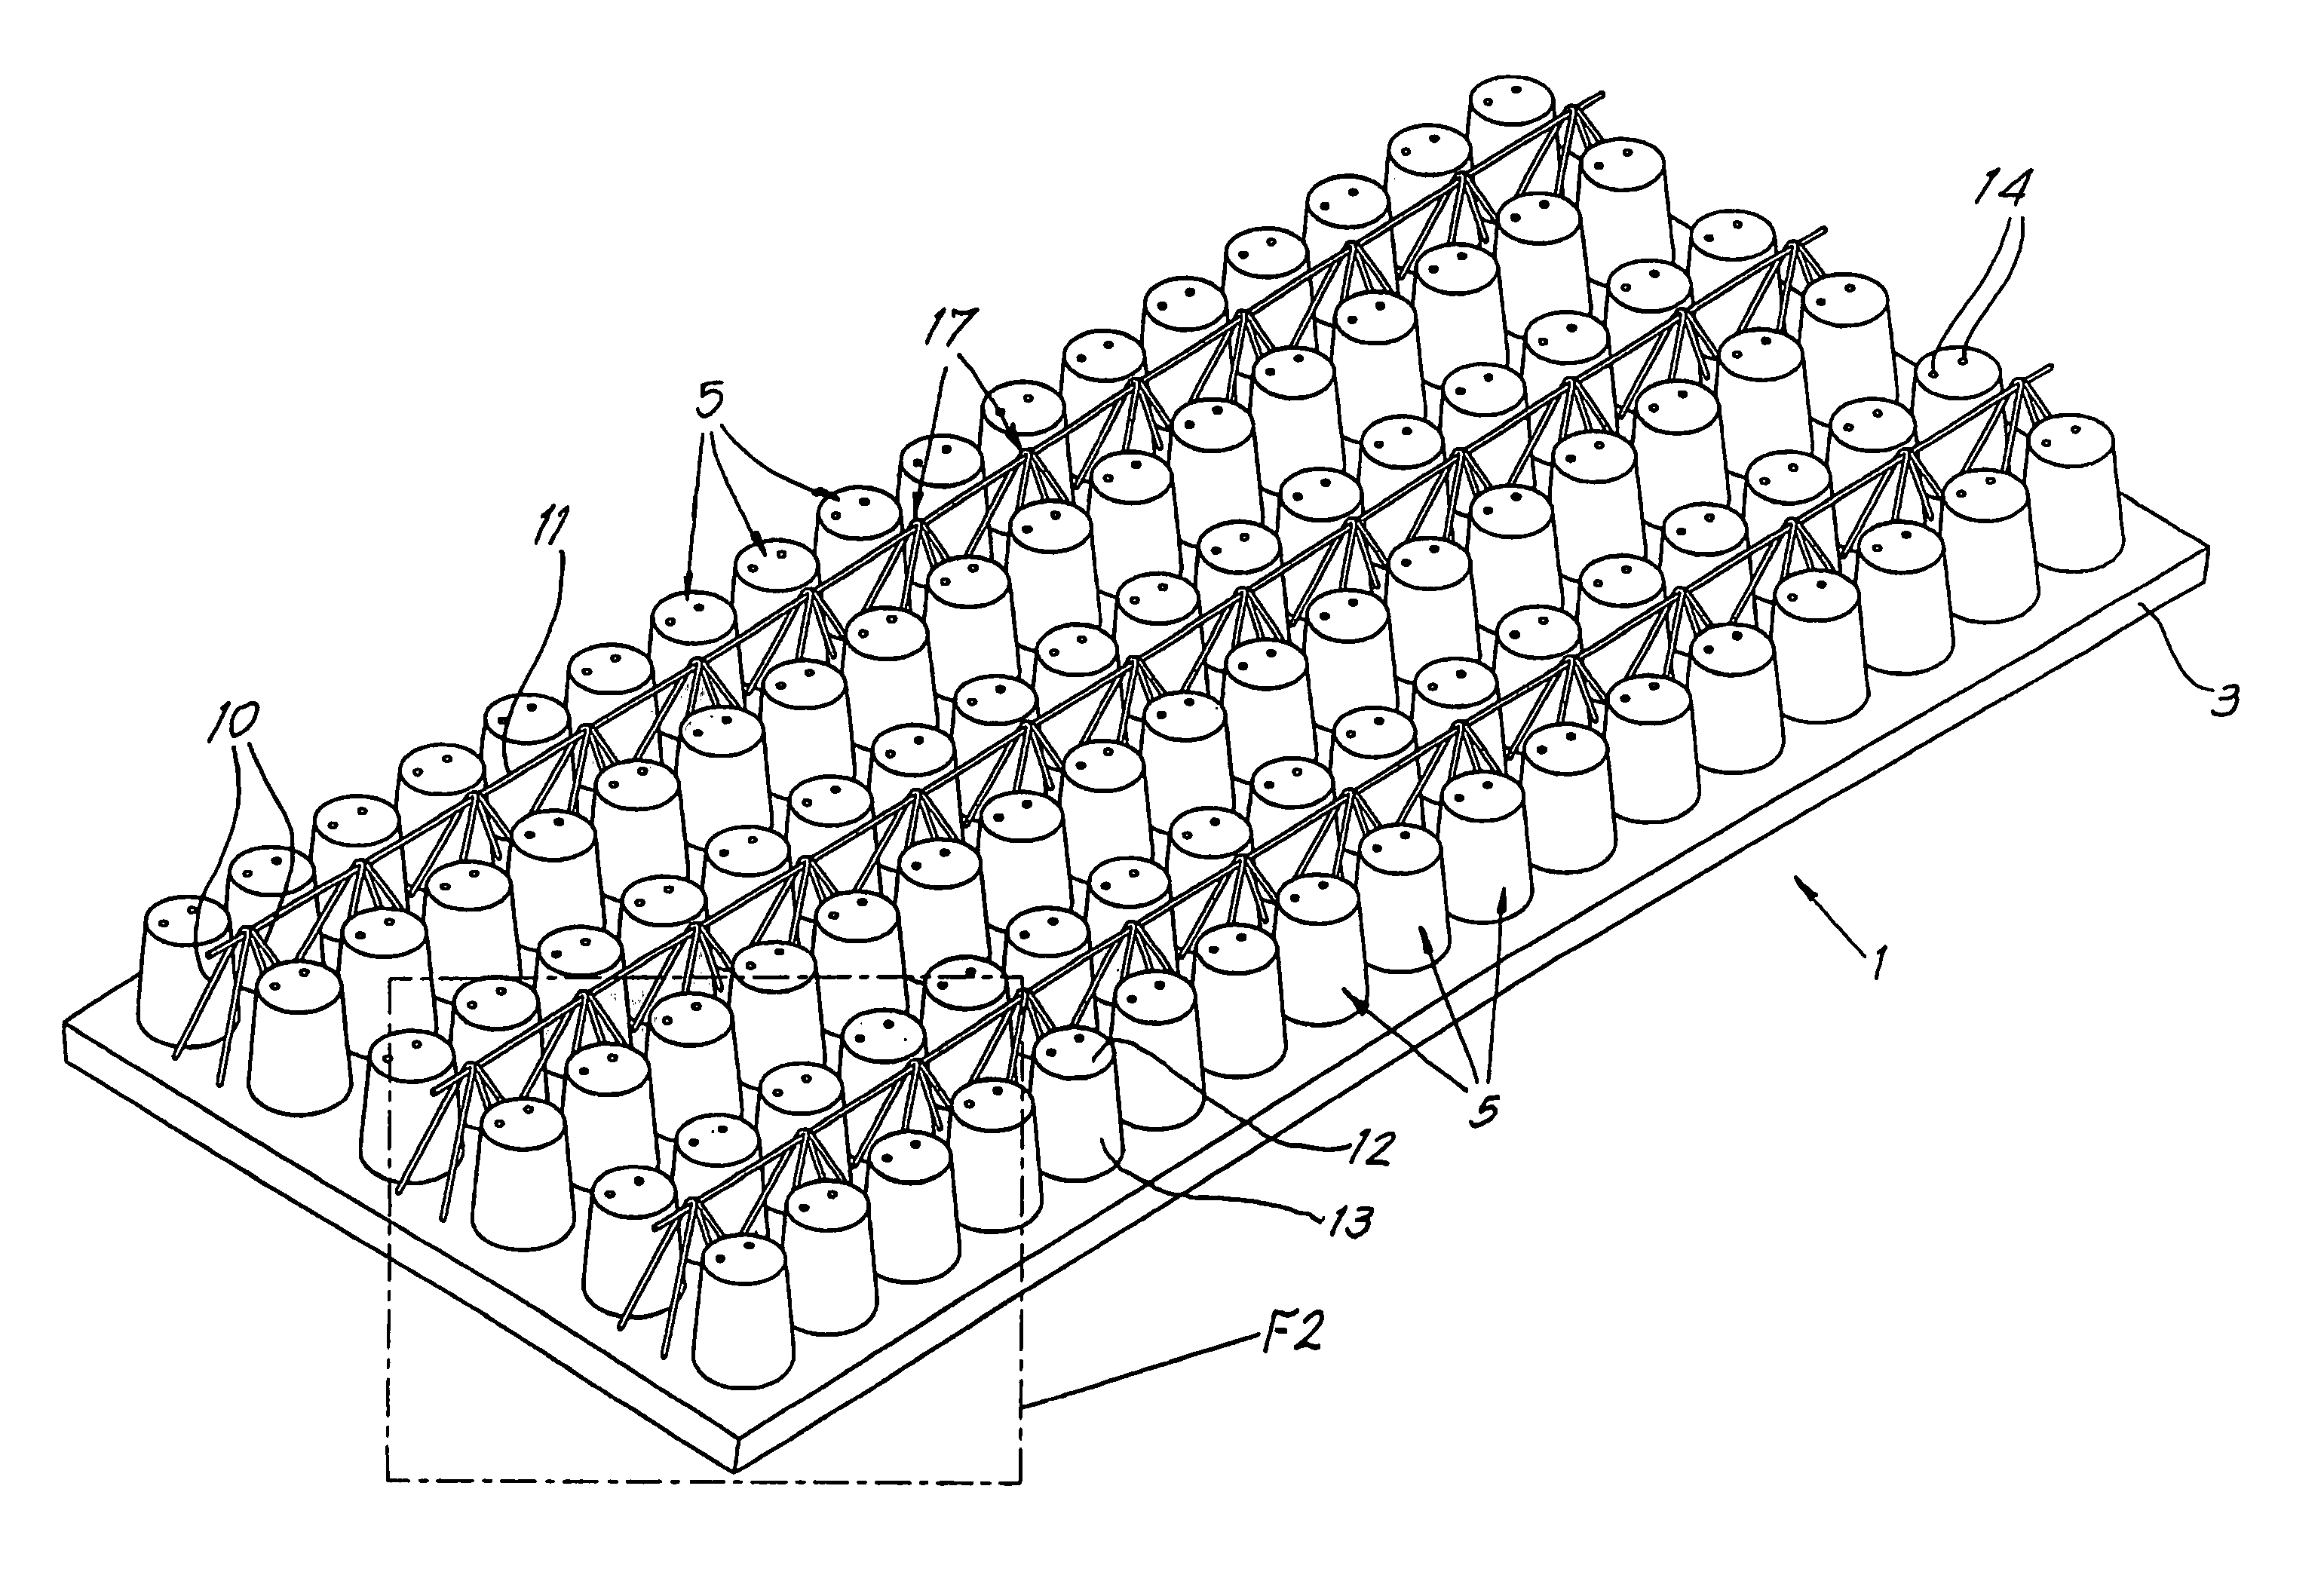 Construction element and method for manufacturing it